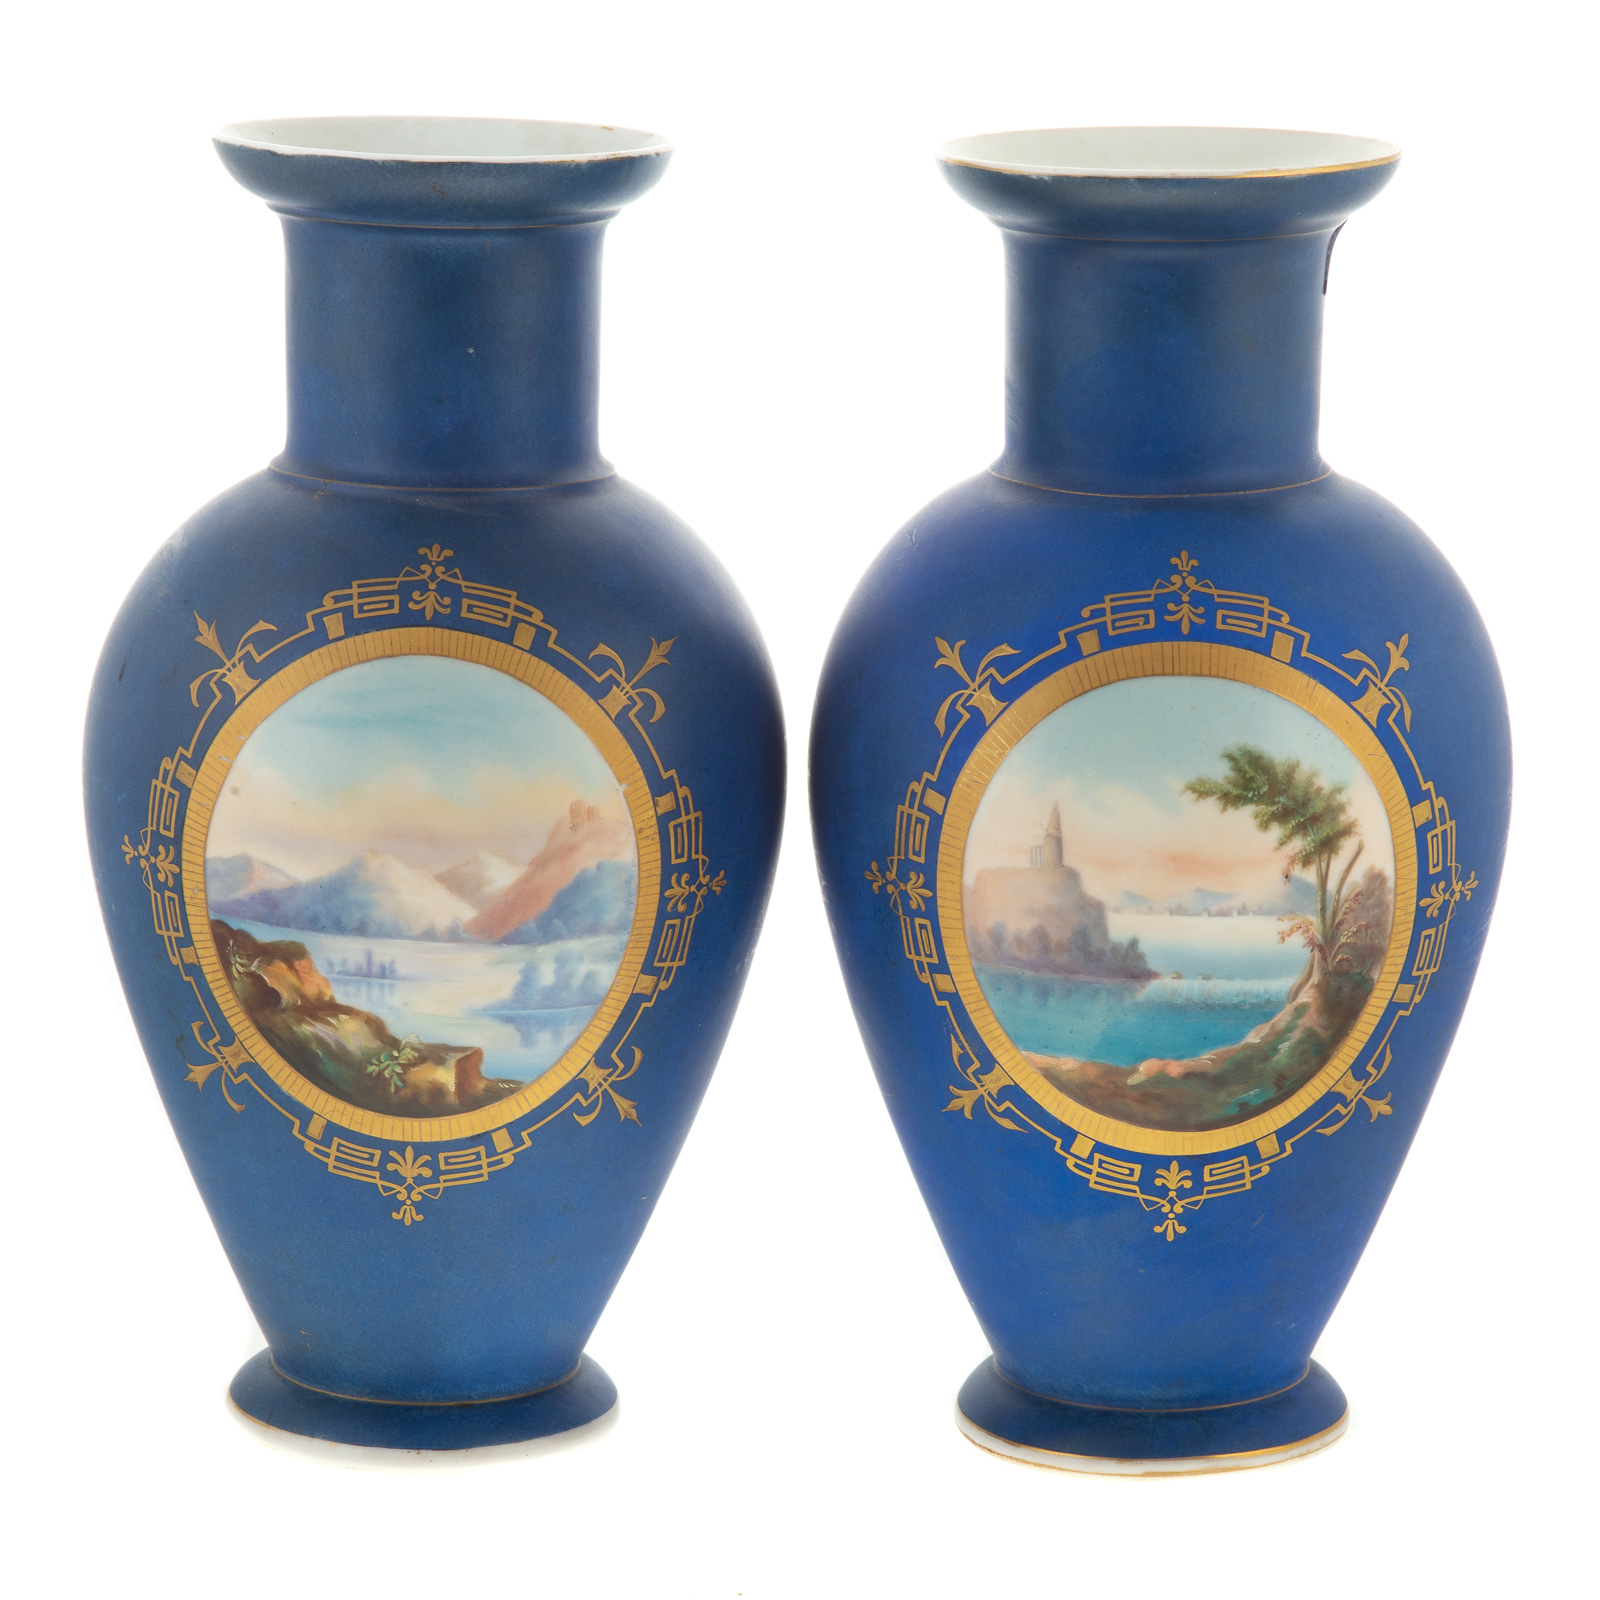 A PAIR OF FRENCH PAINTED PORCELAIN